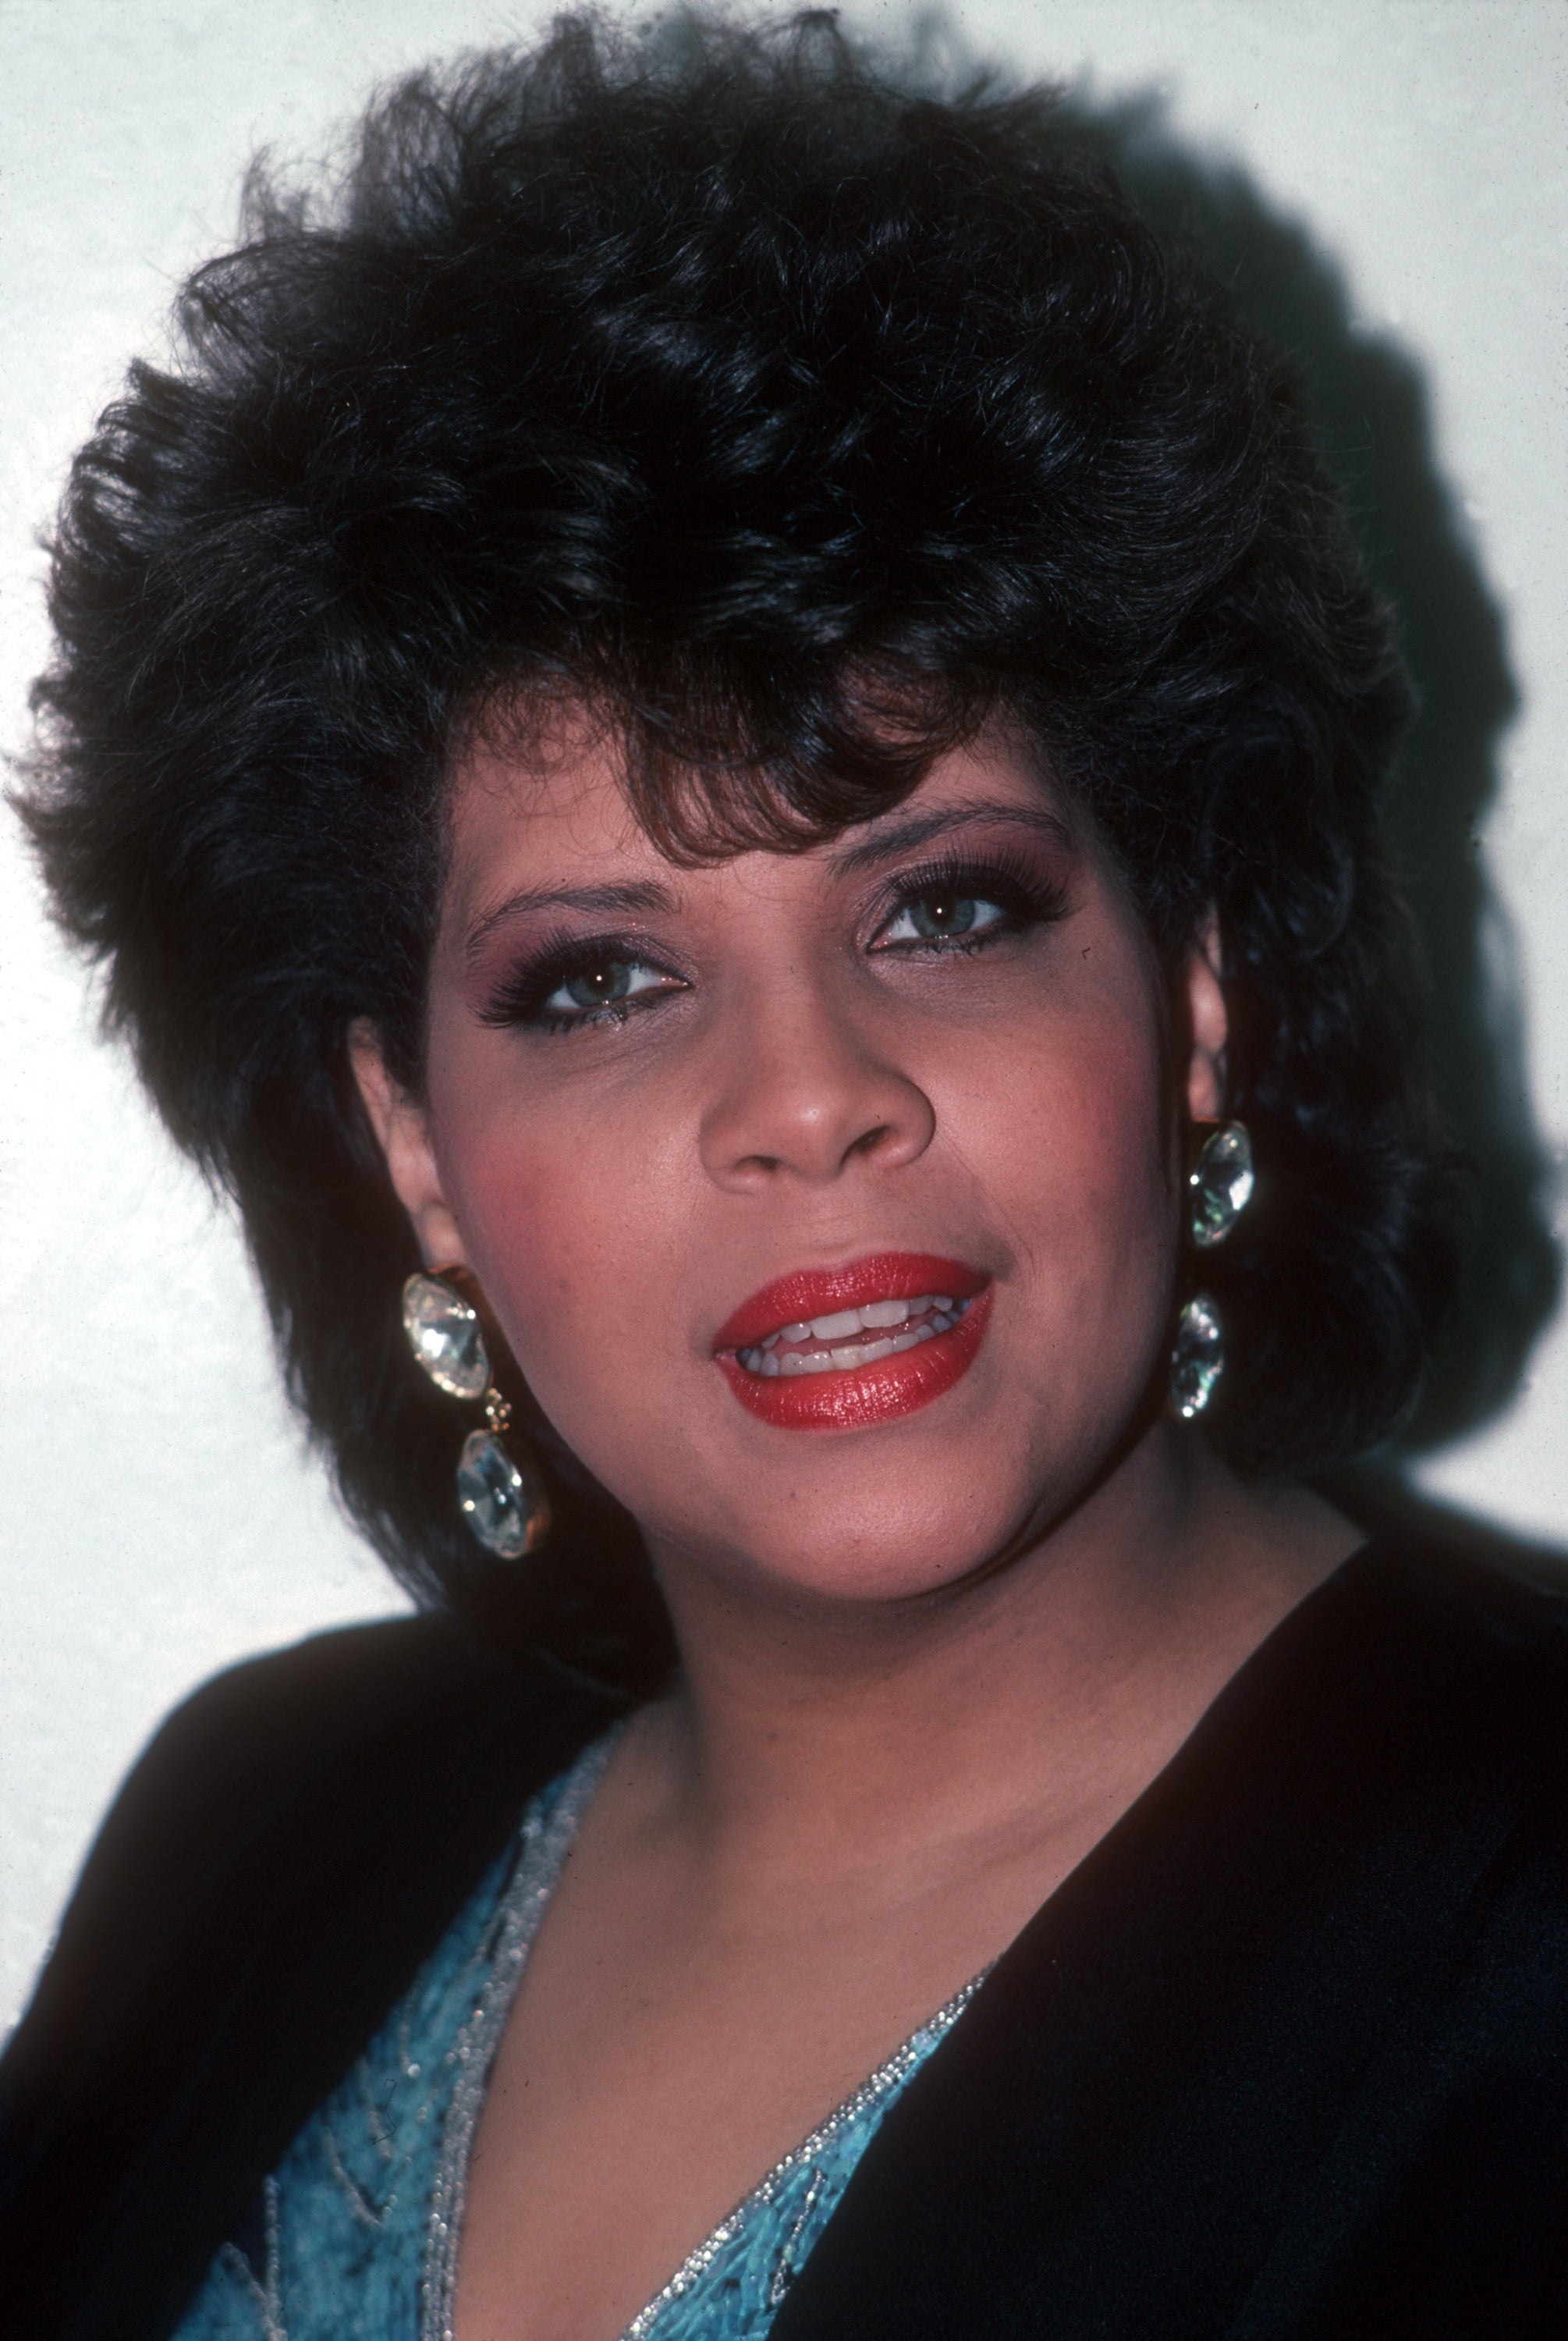 Where Are They Now? Black Female Performers From The '80s
